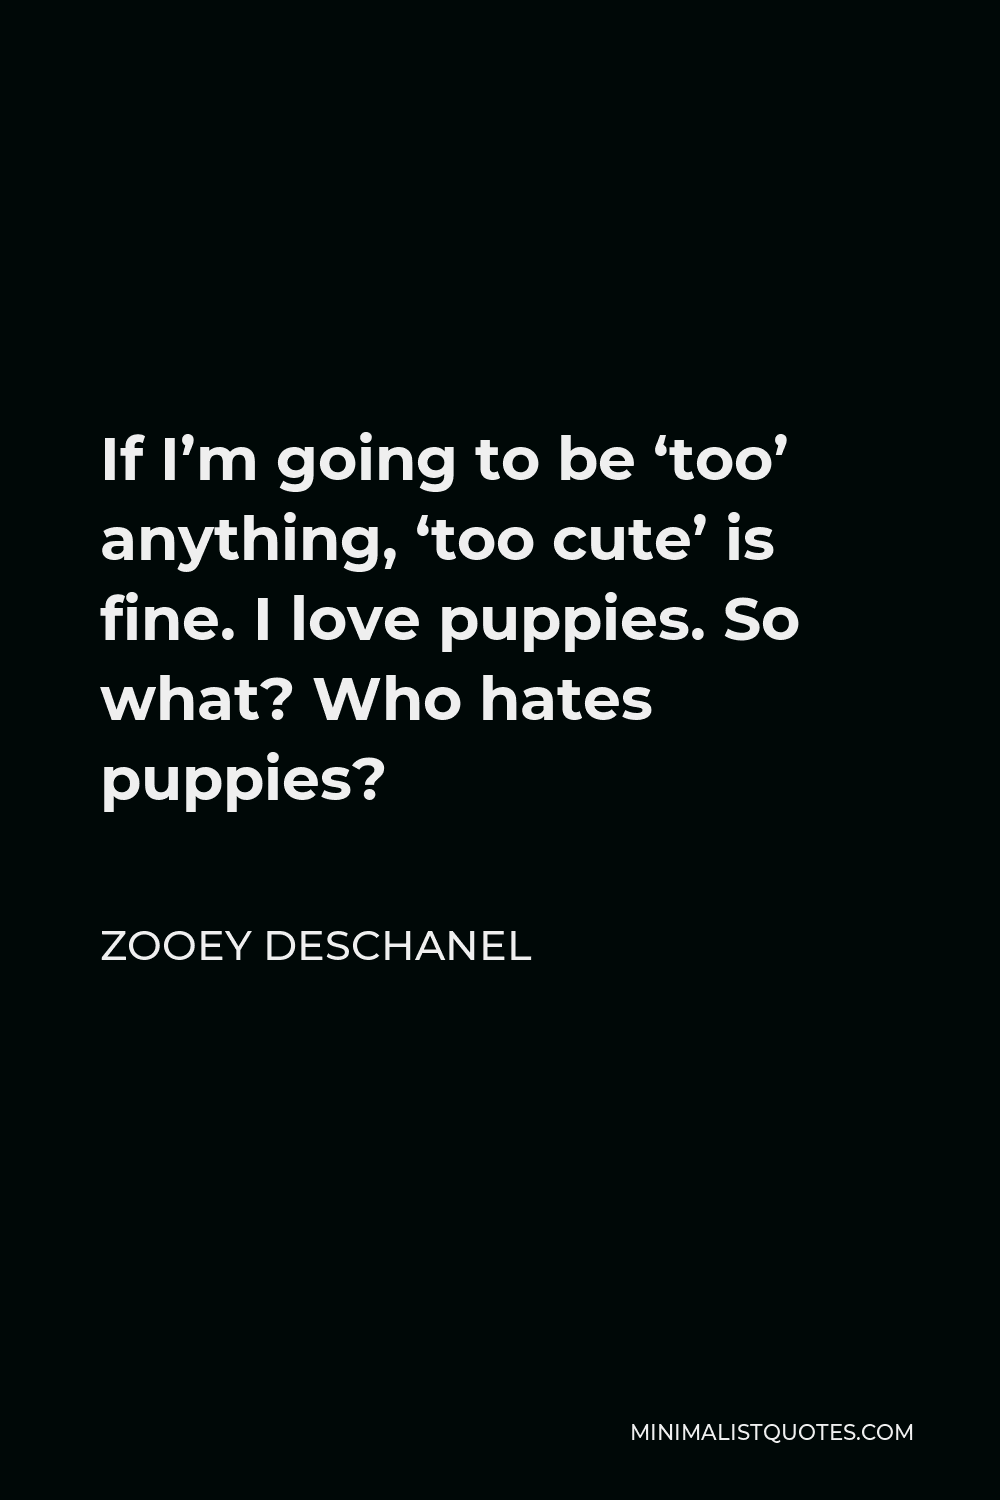 Zooey Deschanel Quote - If I’m going to be ‘too’ anything, ‘too cute’ is fine. I love puppies. So what? Who hates puppies?